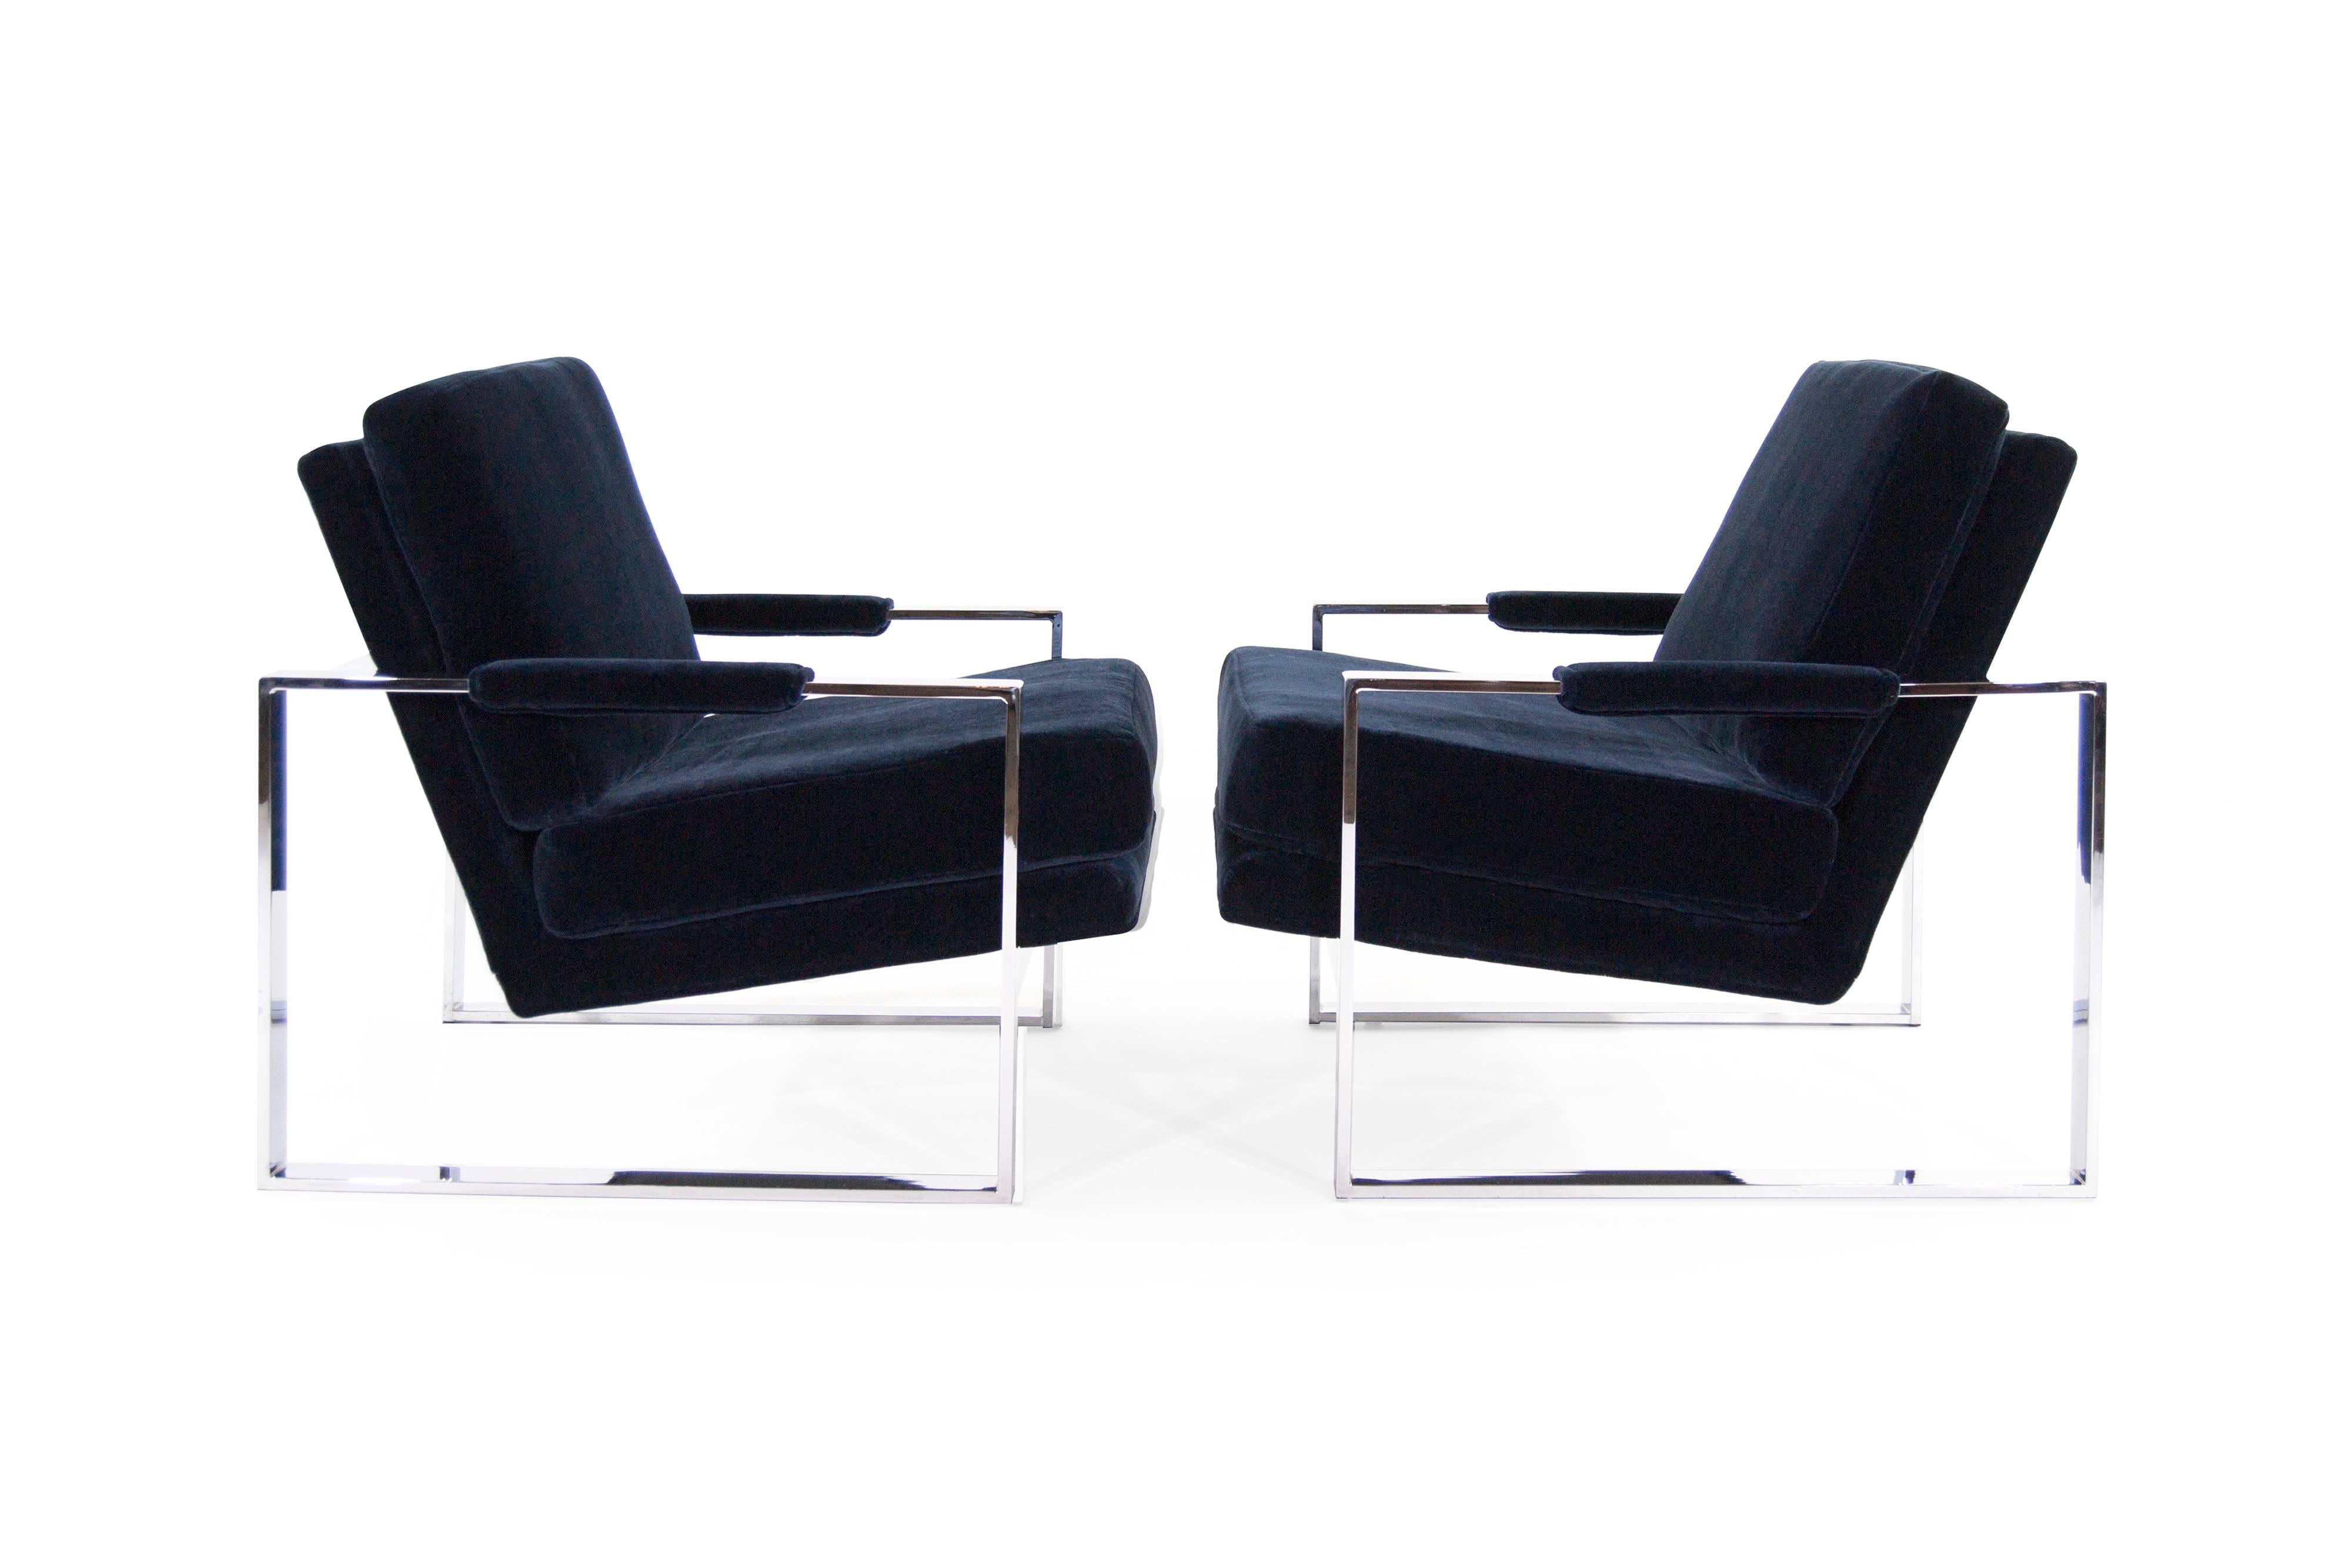 Pair of lounge chairs designed by Milo Baughman for Thayer Coggin newly recovered in midnight blue mohair by Donghia.
Chrome frames in perfect condition, no chips, discoloration or rust.